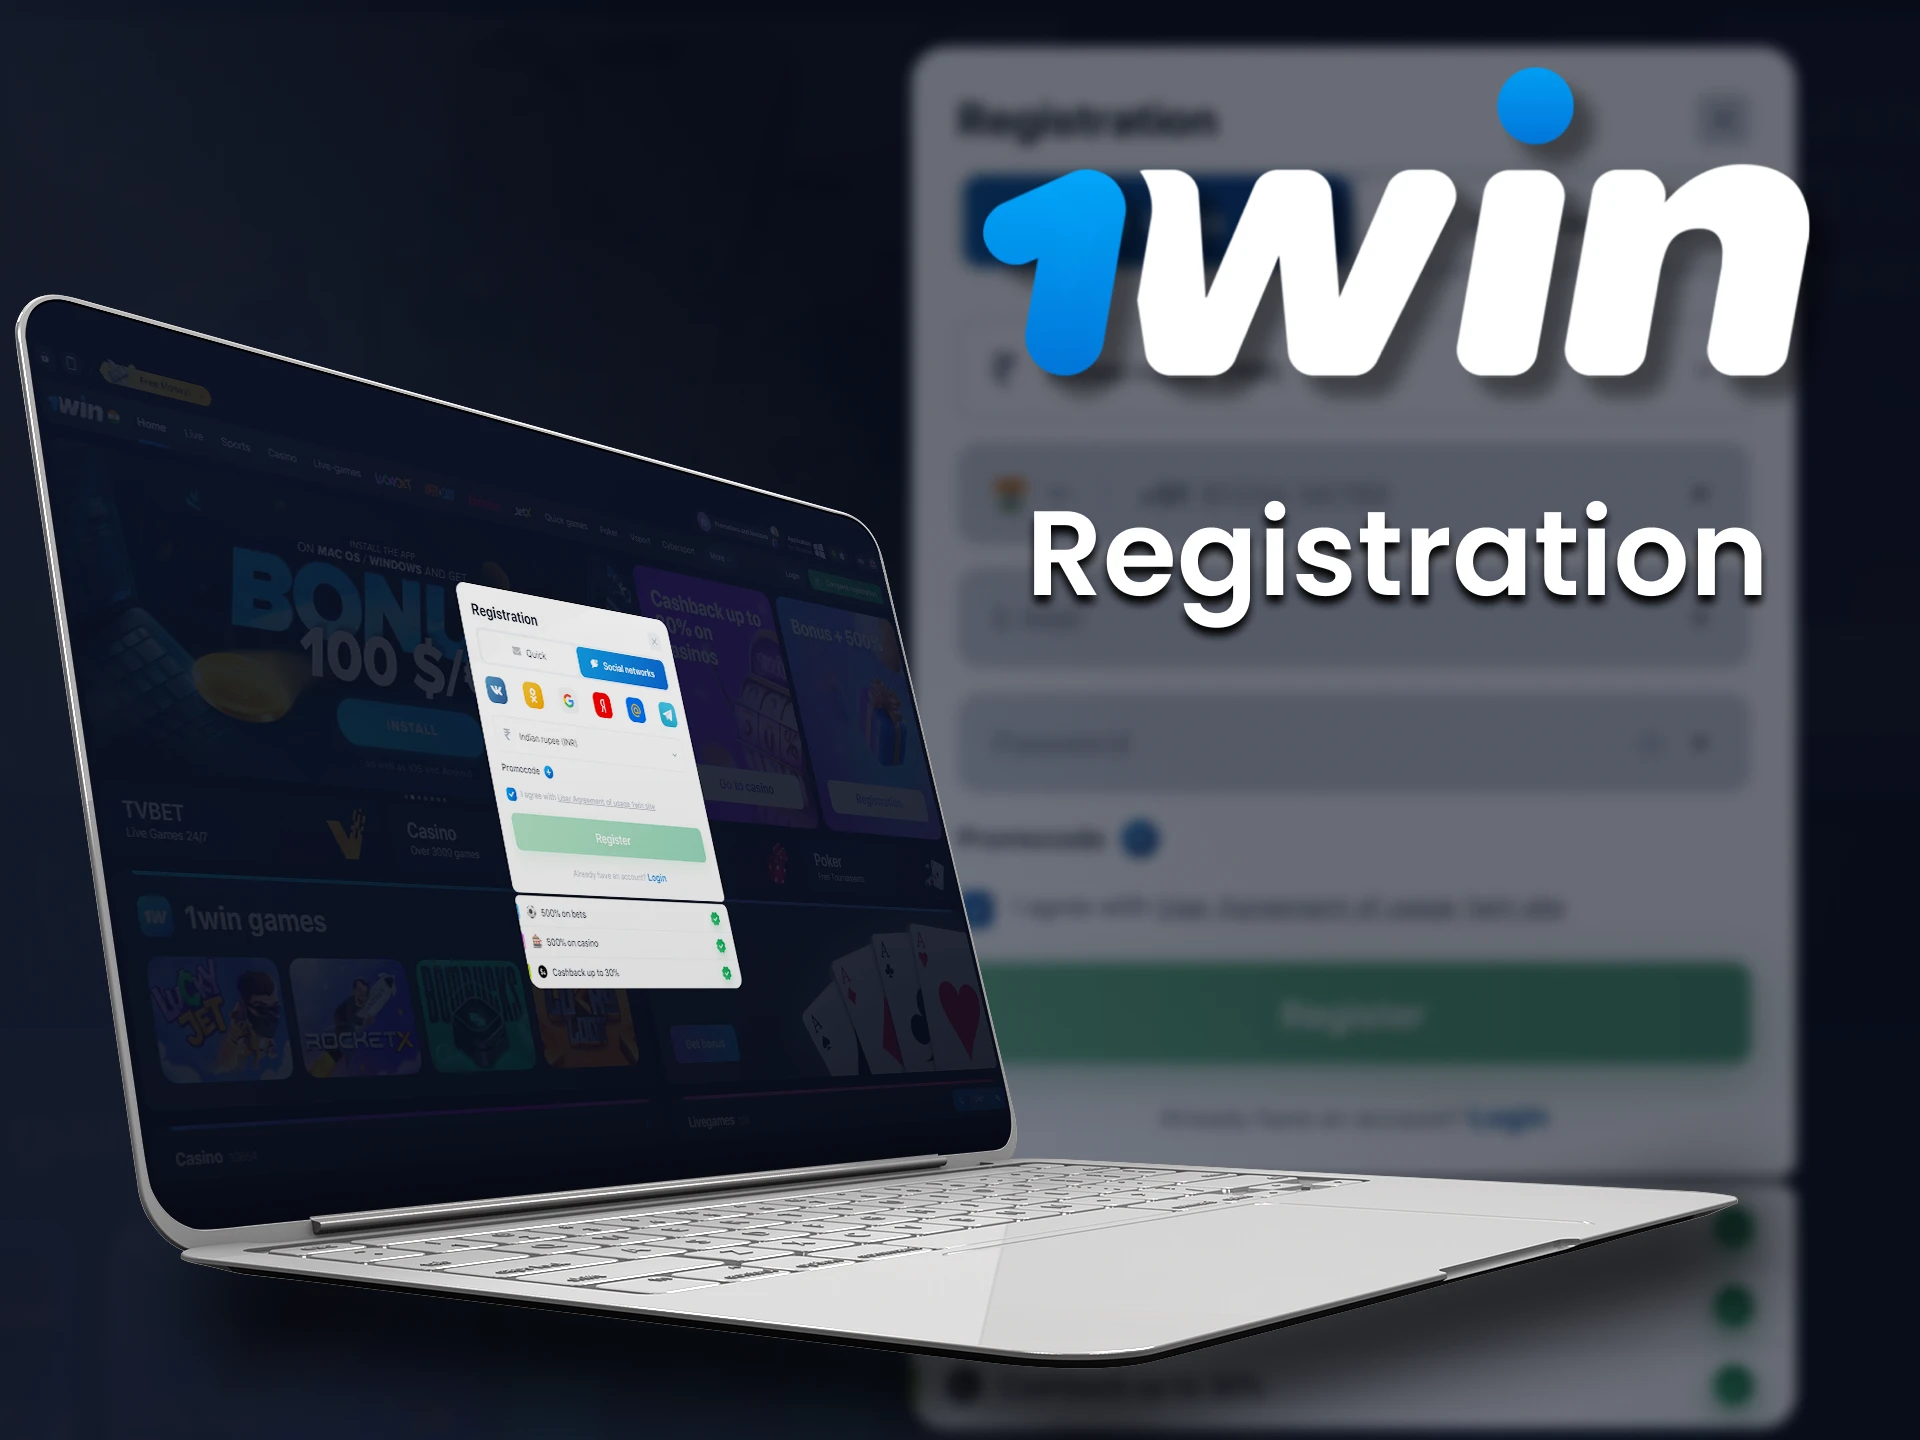 Register your account at 1win in 5 easy steps.